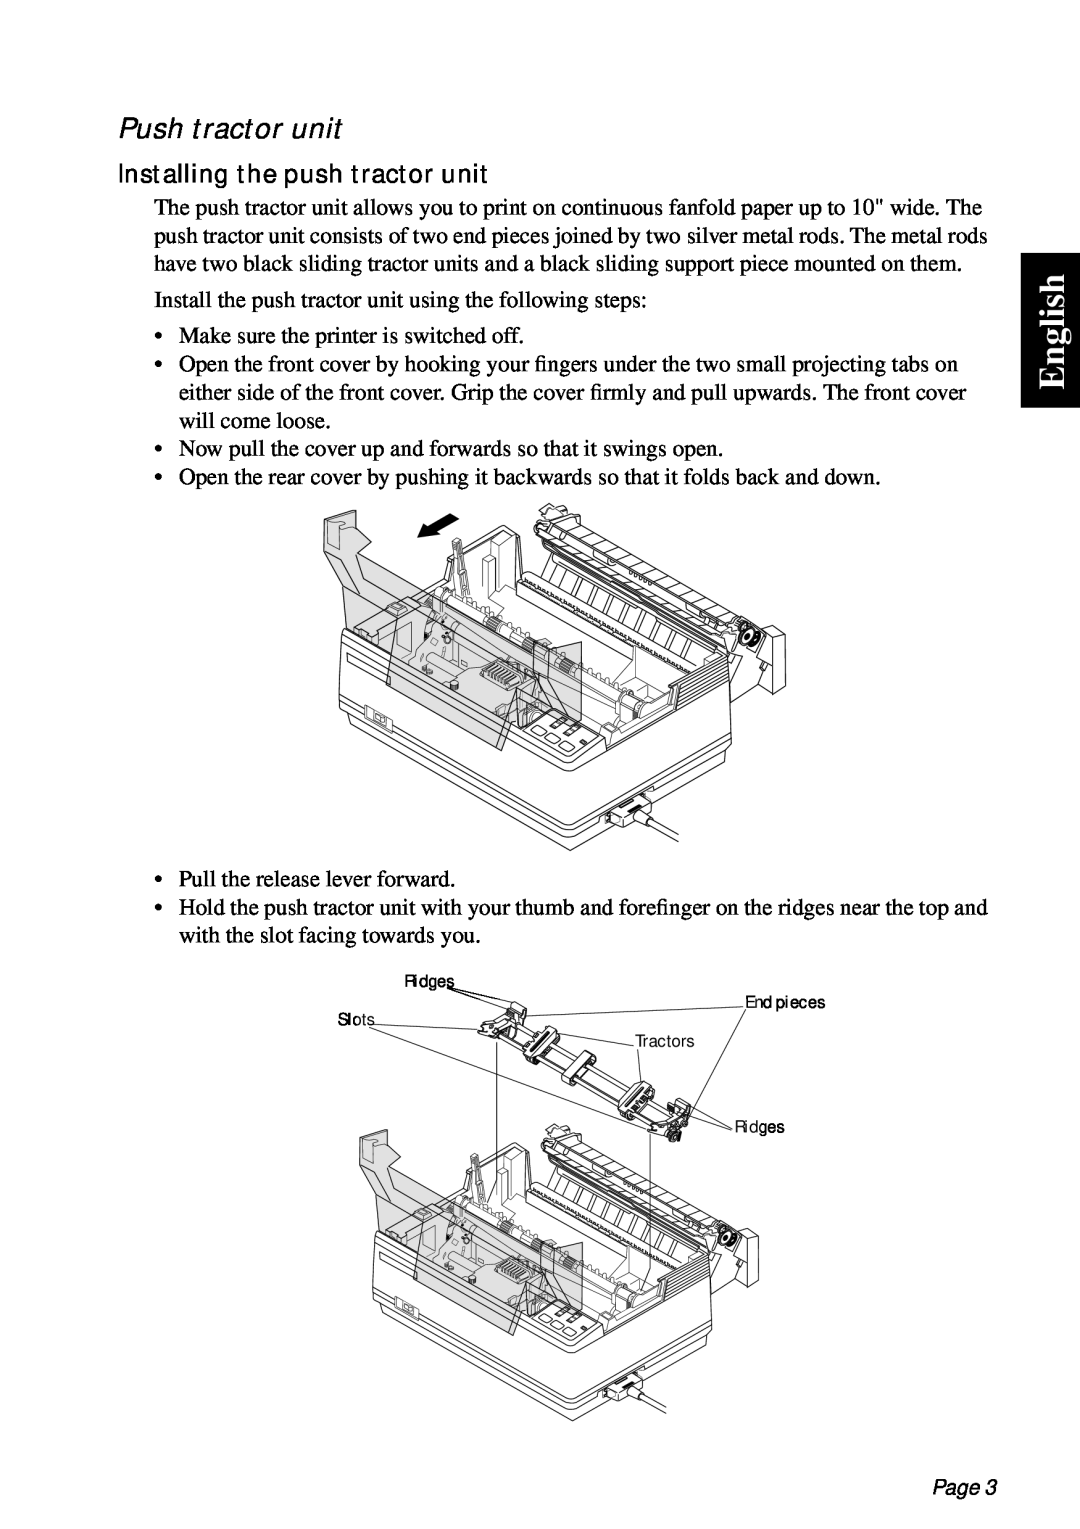 Star Micronics PT-10Q user manual English, Push tractor unit, Installing the push tractor unit, Page 